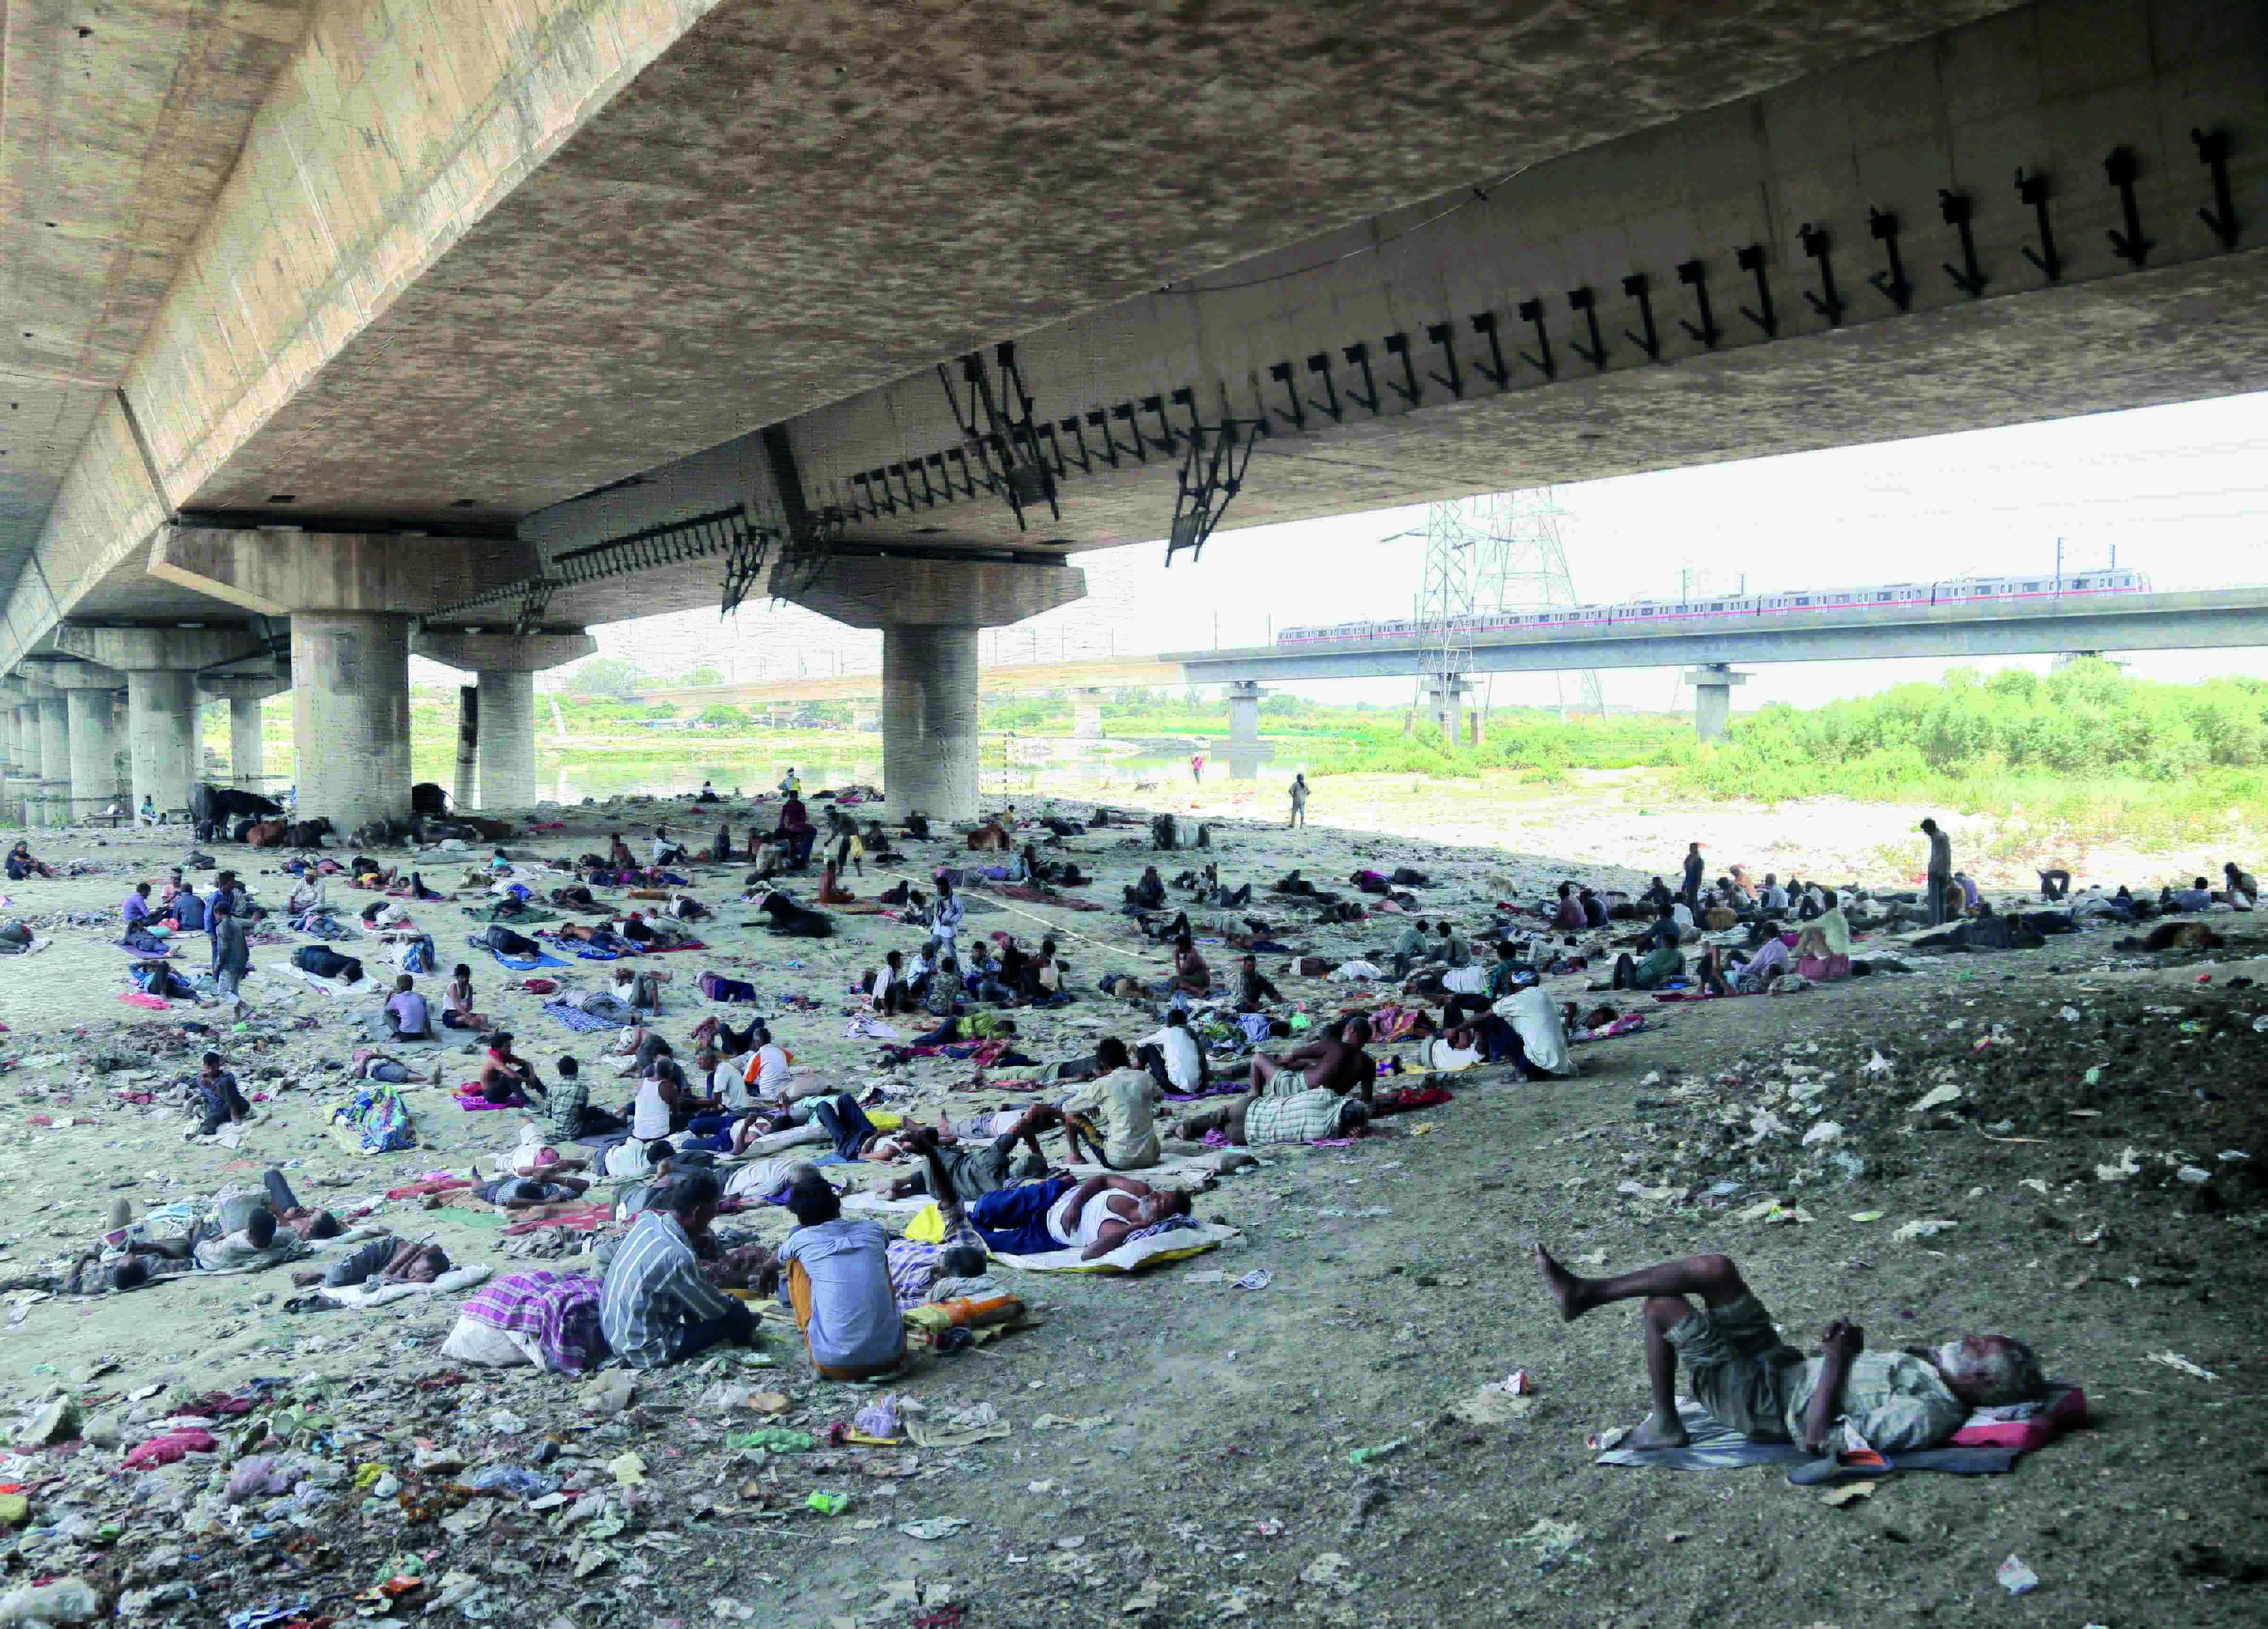 Delhis drinking water problems worsen as Yamuna nearly dries up